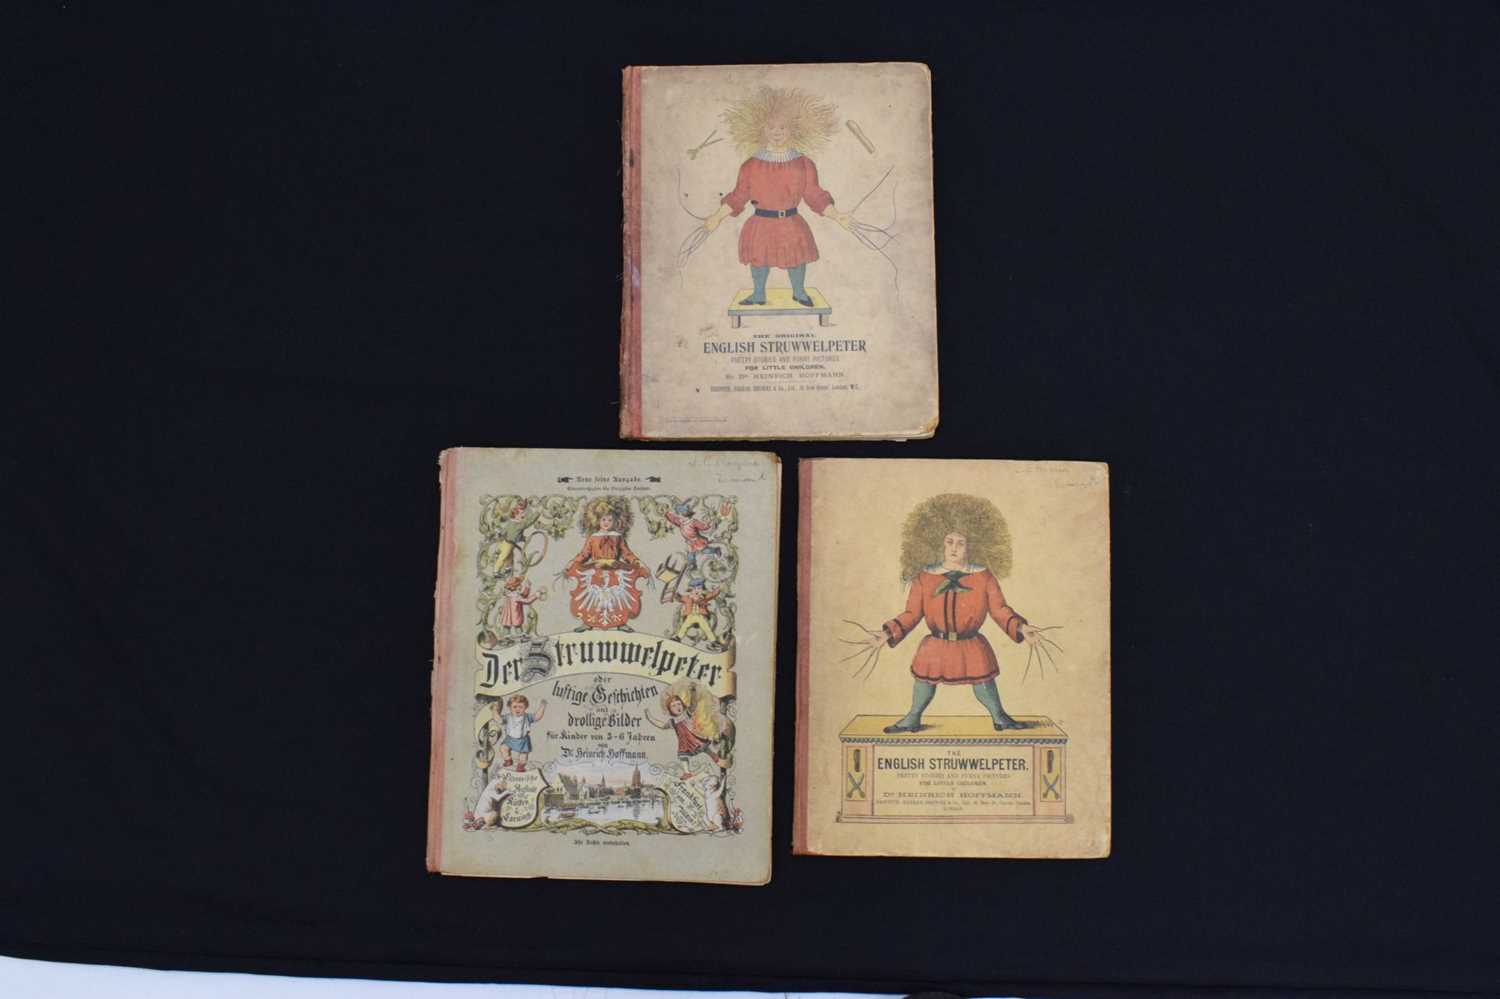 'Der Struwwelpeter' by Dr Heinrich Hoffman, German and English editions - Image 2 of 12